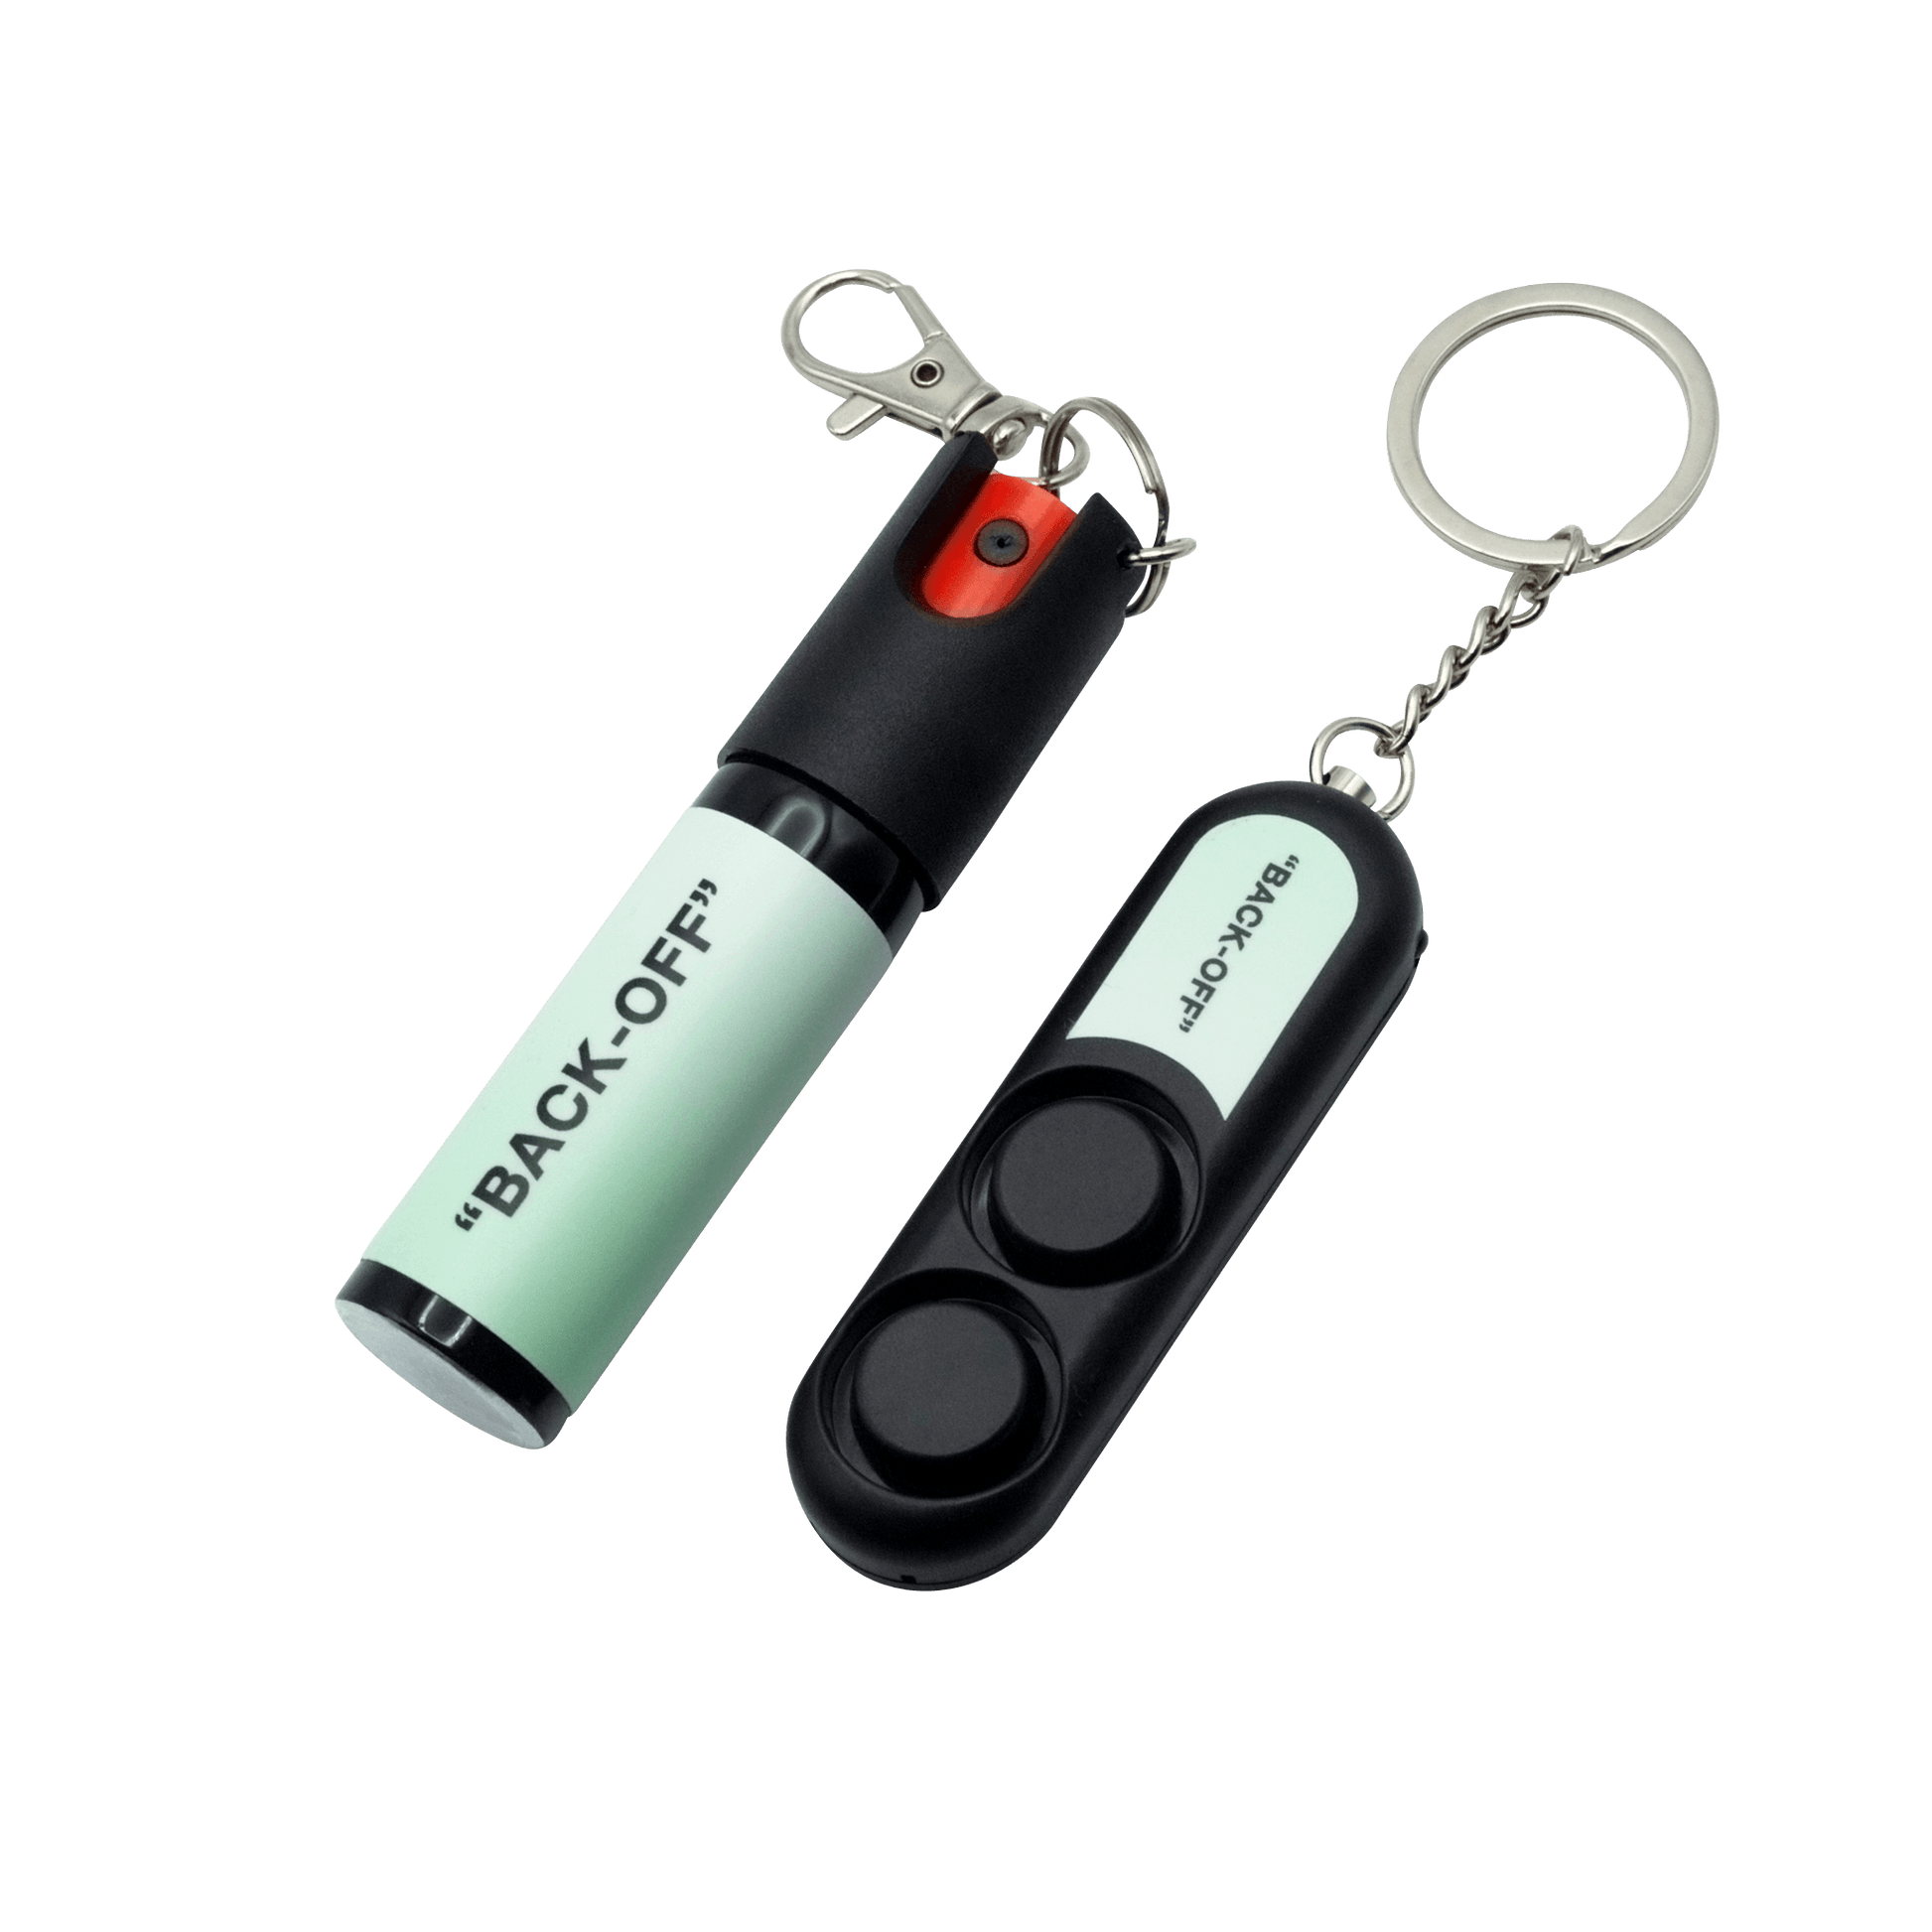 Green “Back Off” SDK Pepper Spray (20ml compact Pepper Spray with keychain attachment) & SDK Personal Safety Alarm (120db loud sound personal alarm which activates with pin removal)